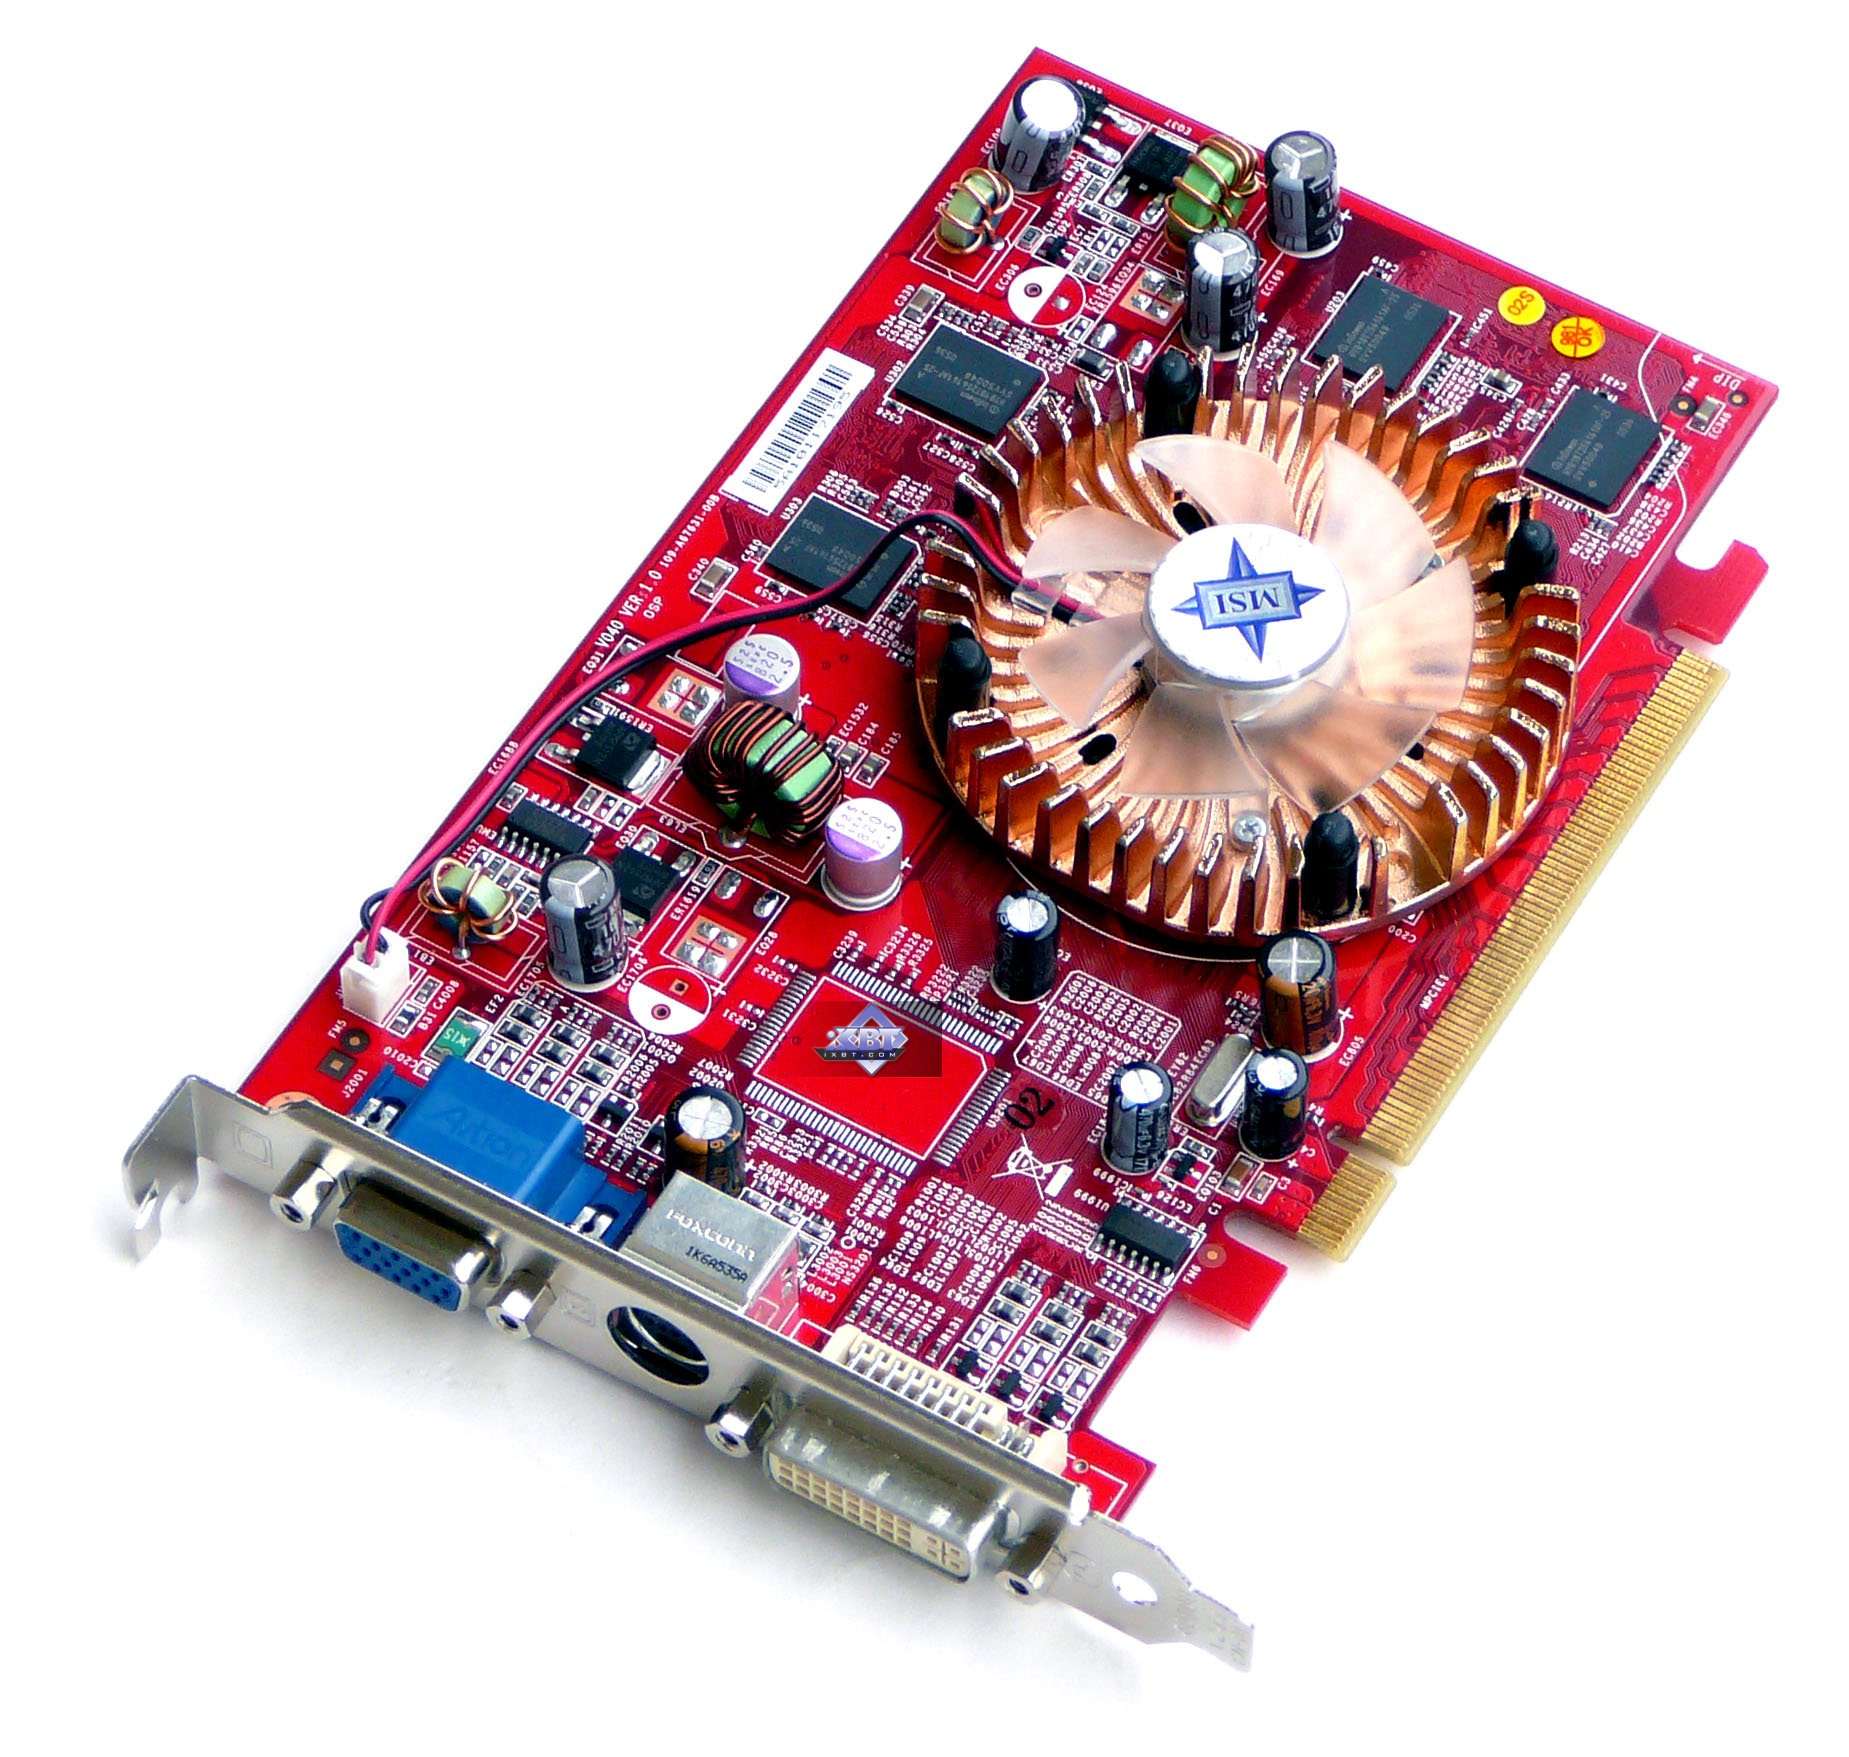 http://www.ixbt.com/video2/images/g80-4/msi-x1300pro-front.jpg